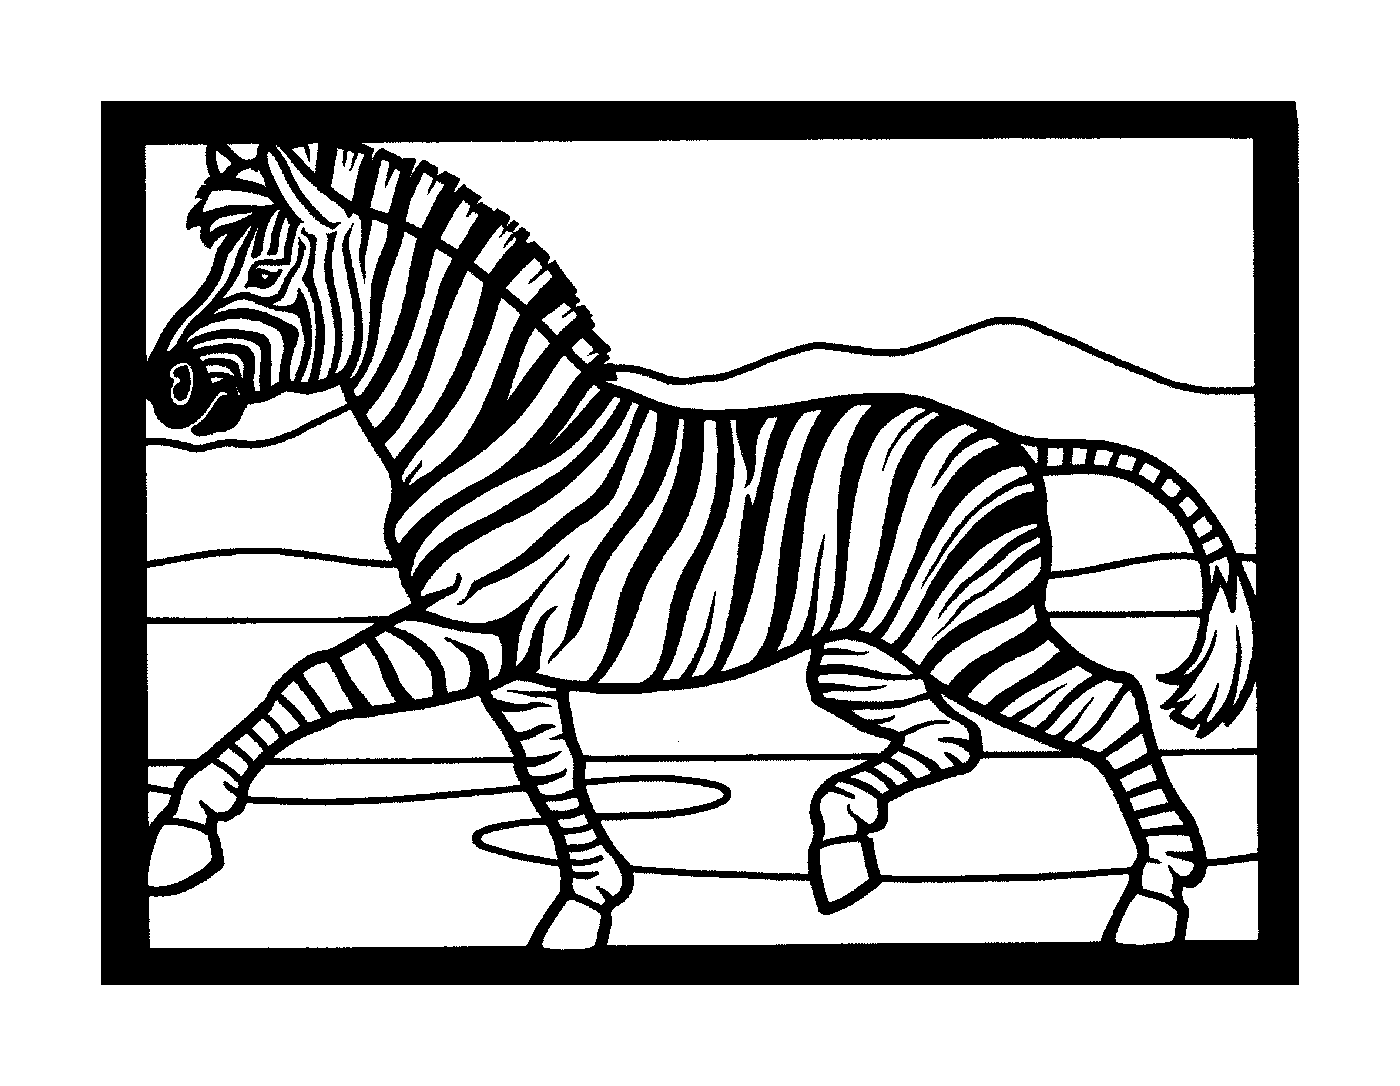  Fast Zebra in the middle of the race 